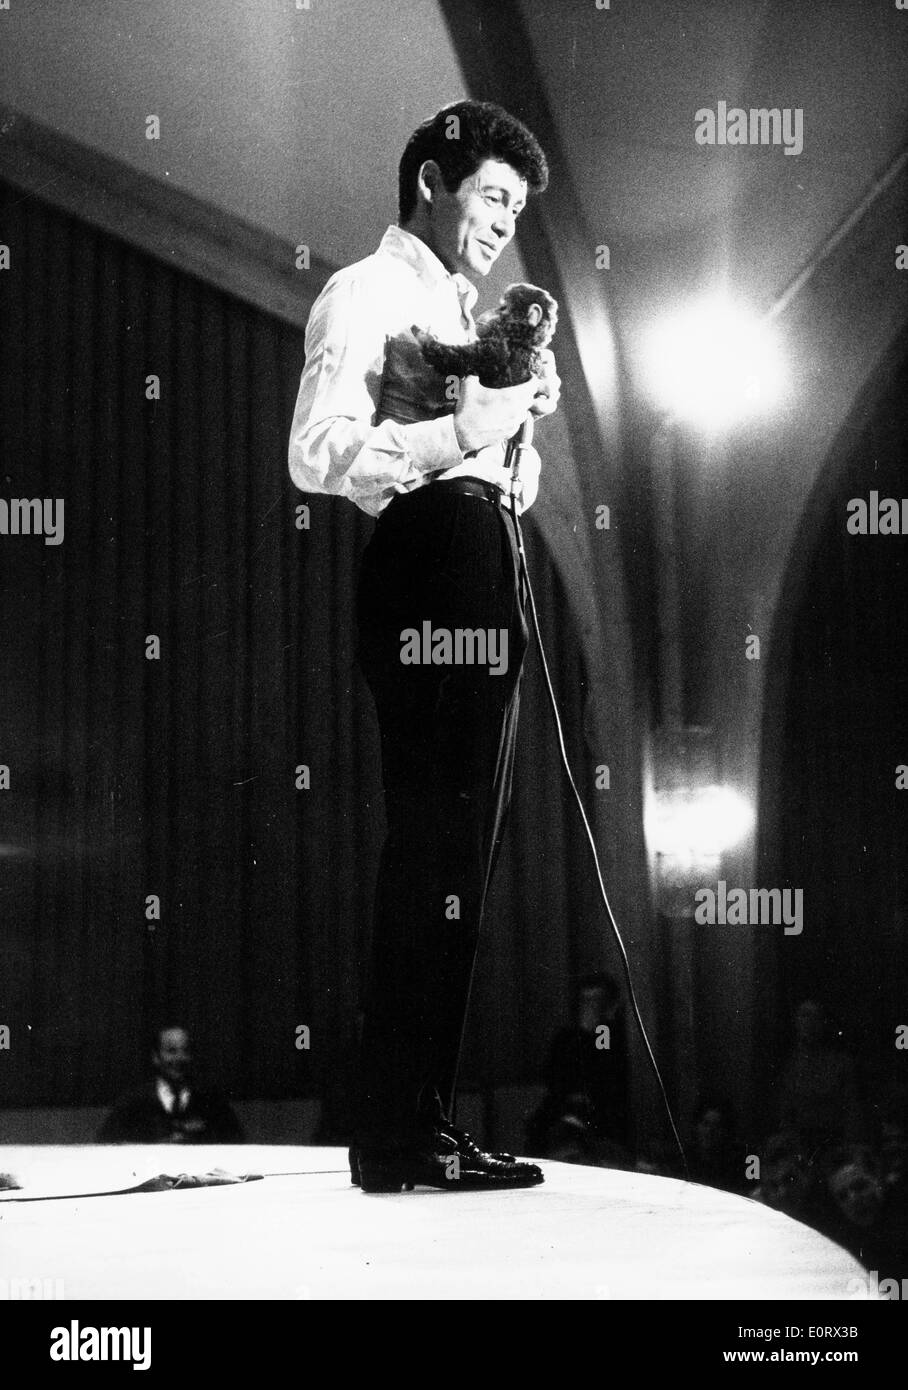 Singer Eddie Fisher performs on stage Stock Photo